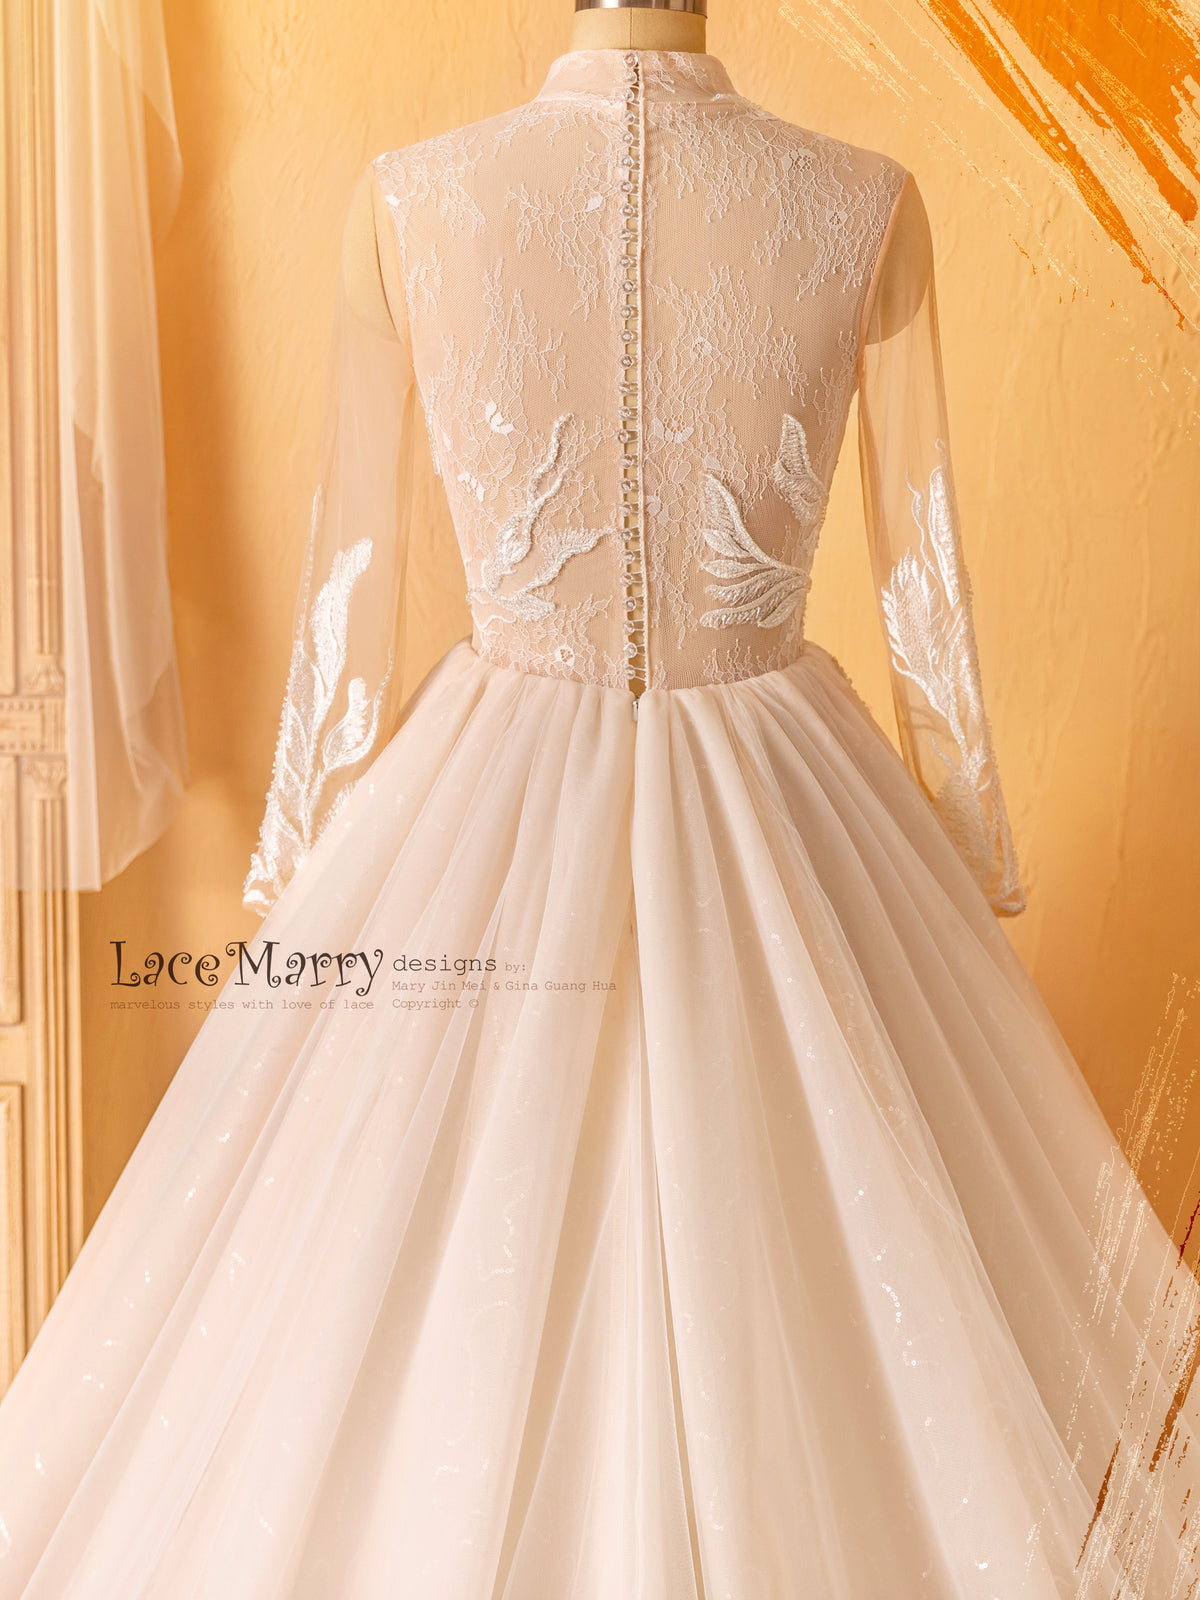 Full Lace Back Wedding Dress with Crystal Buttons